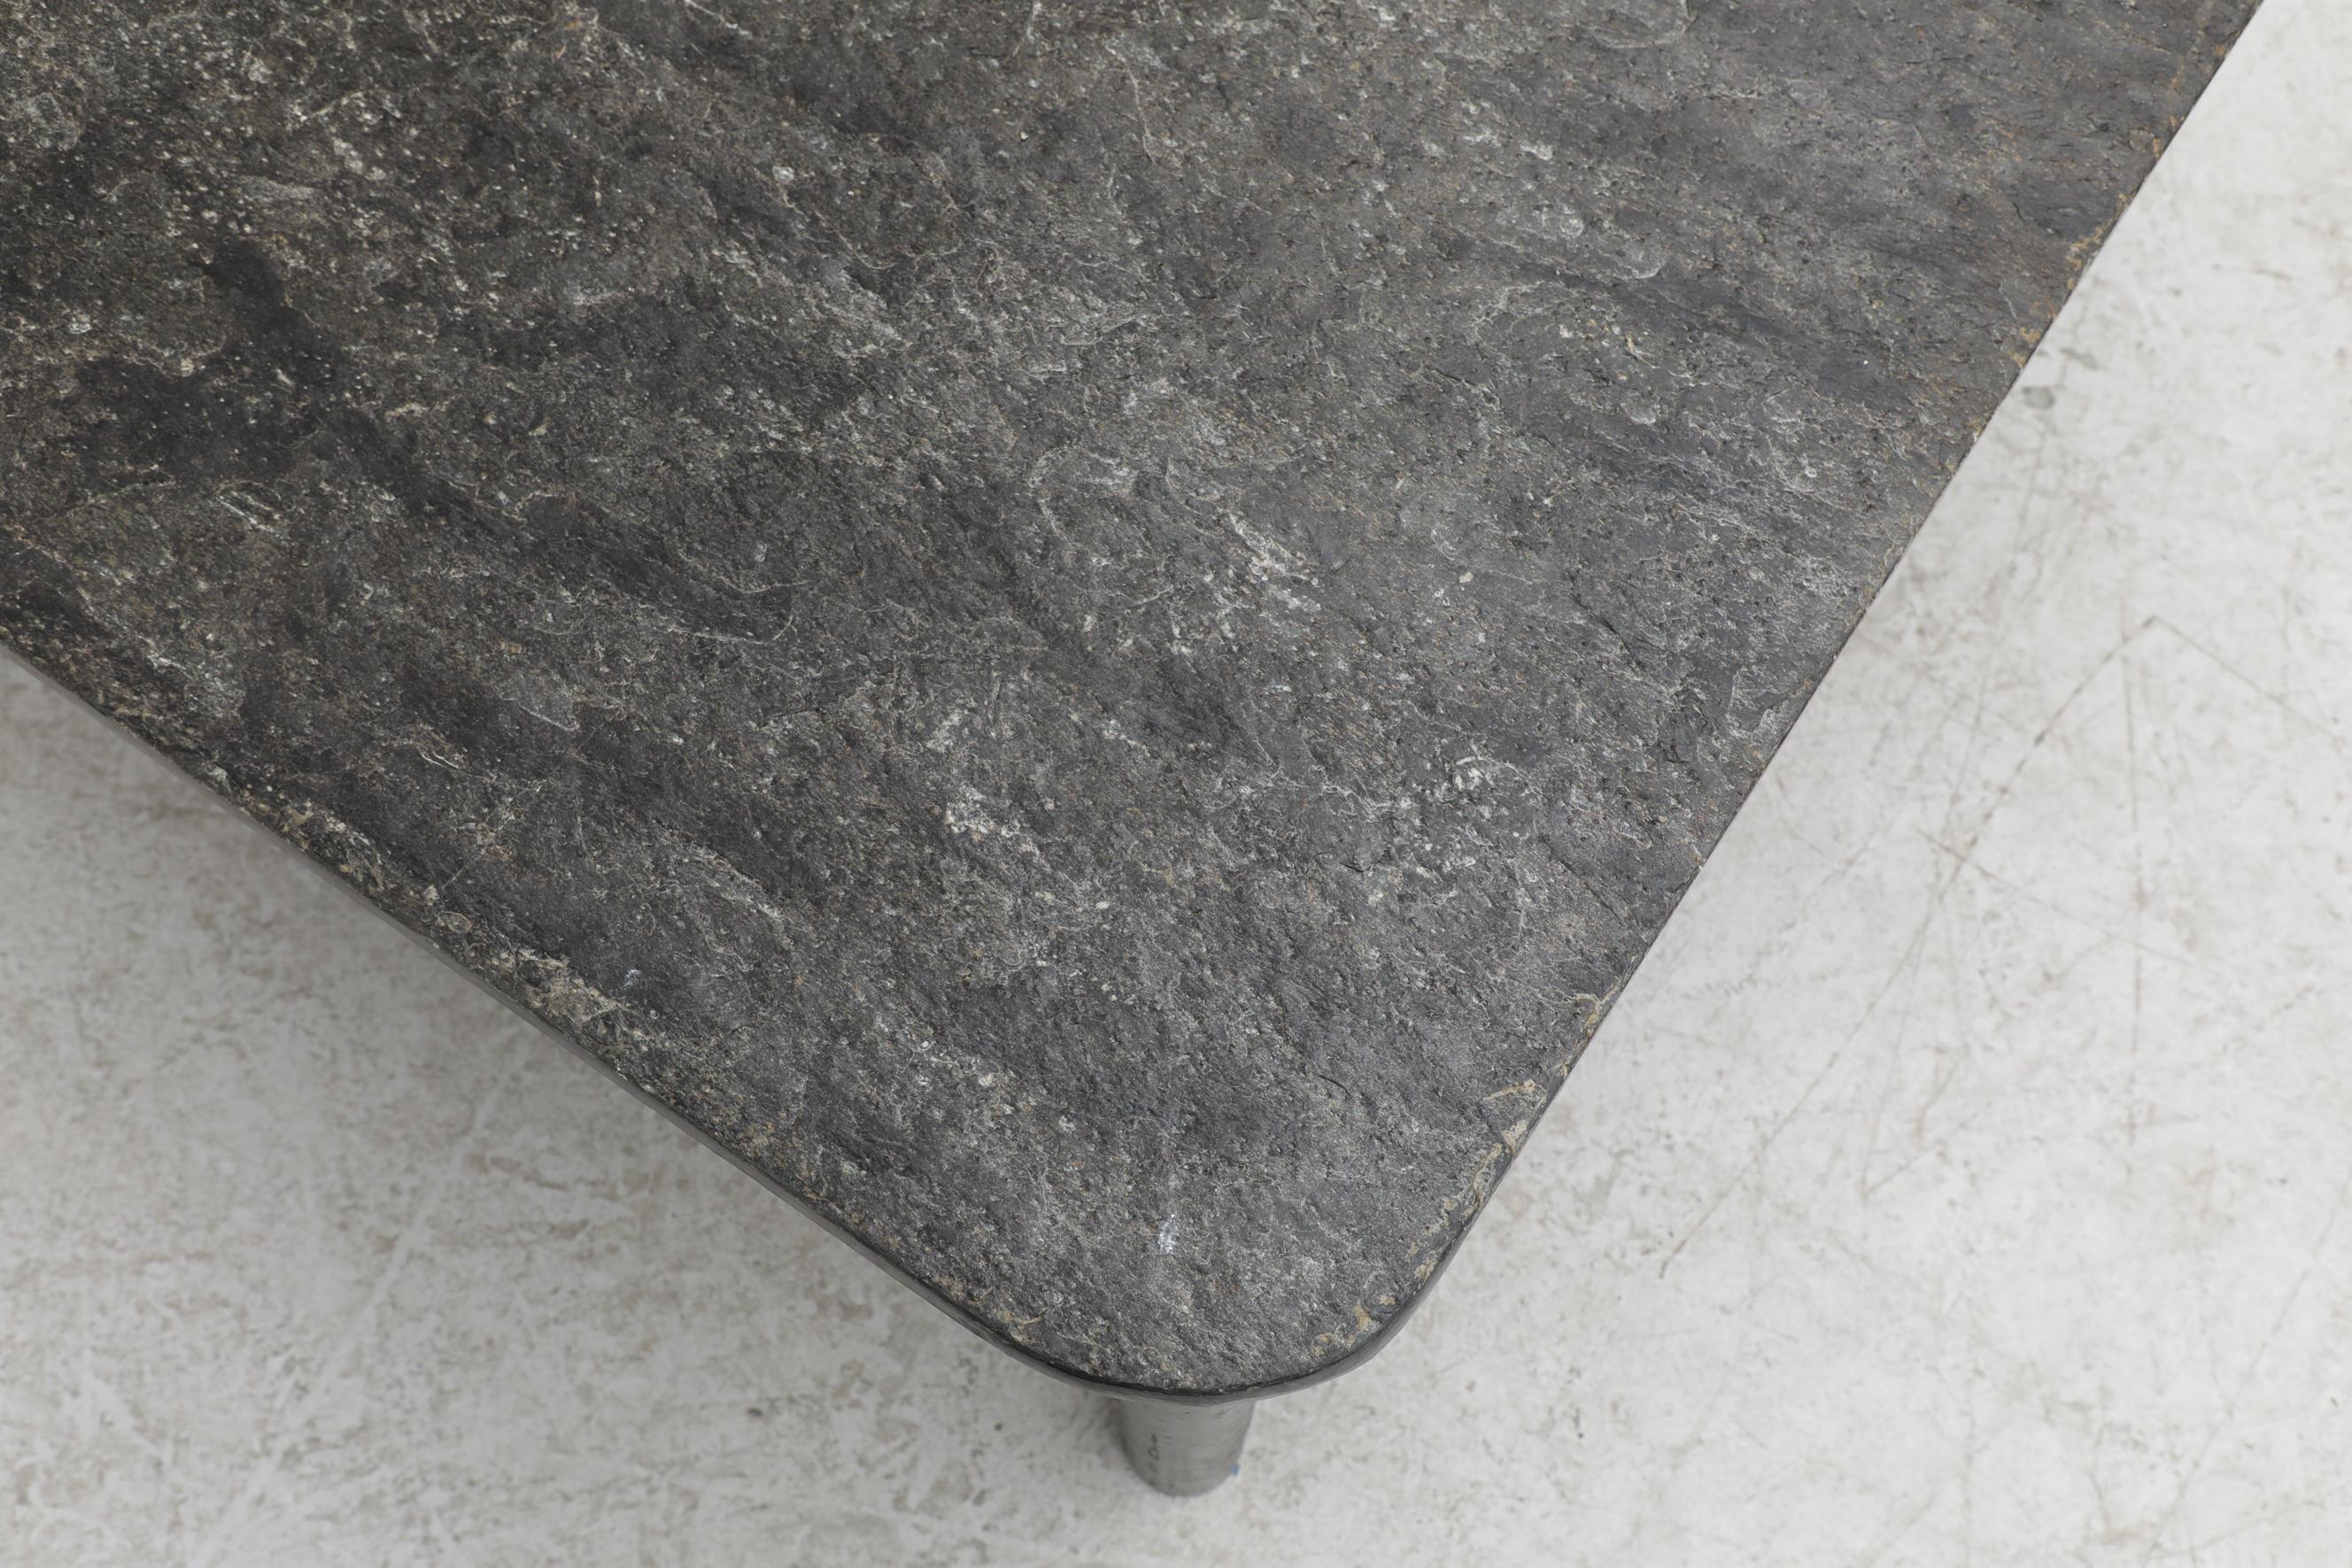 Modernist Square Stone Coffee Table With Metal X-Base 1